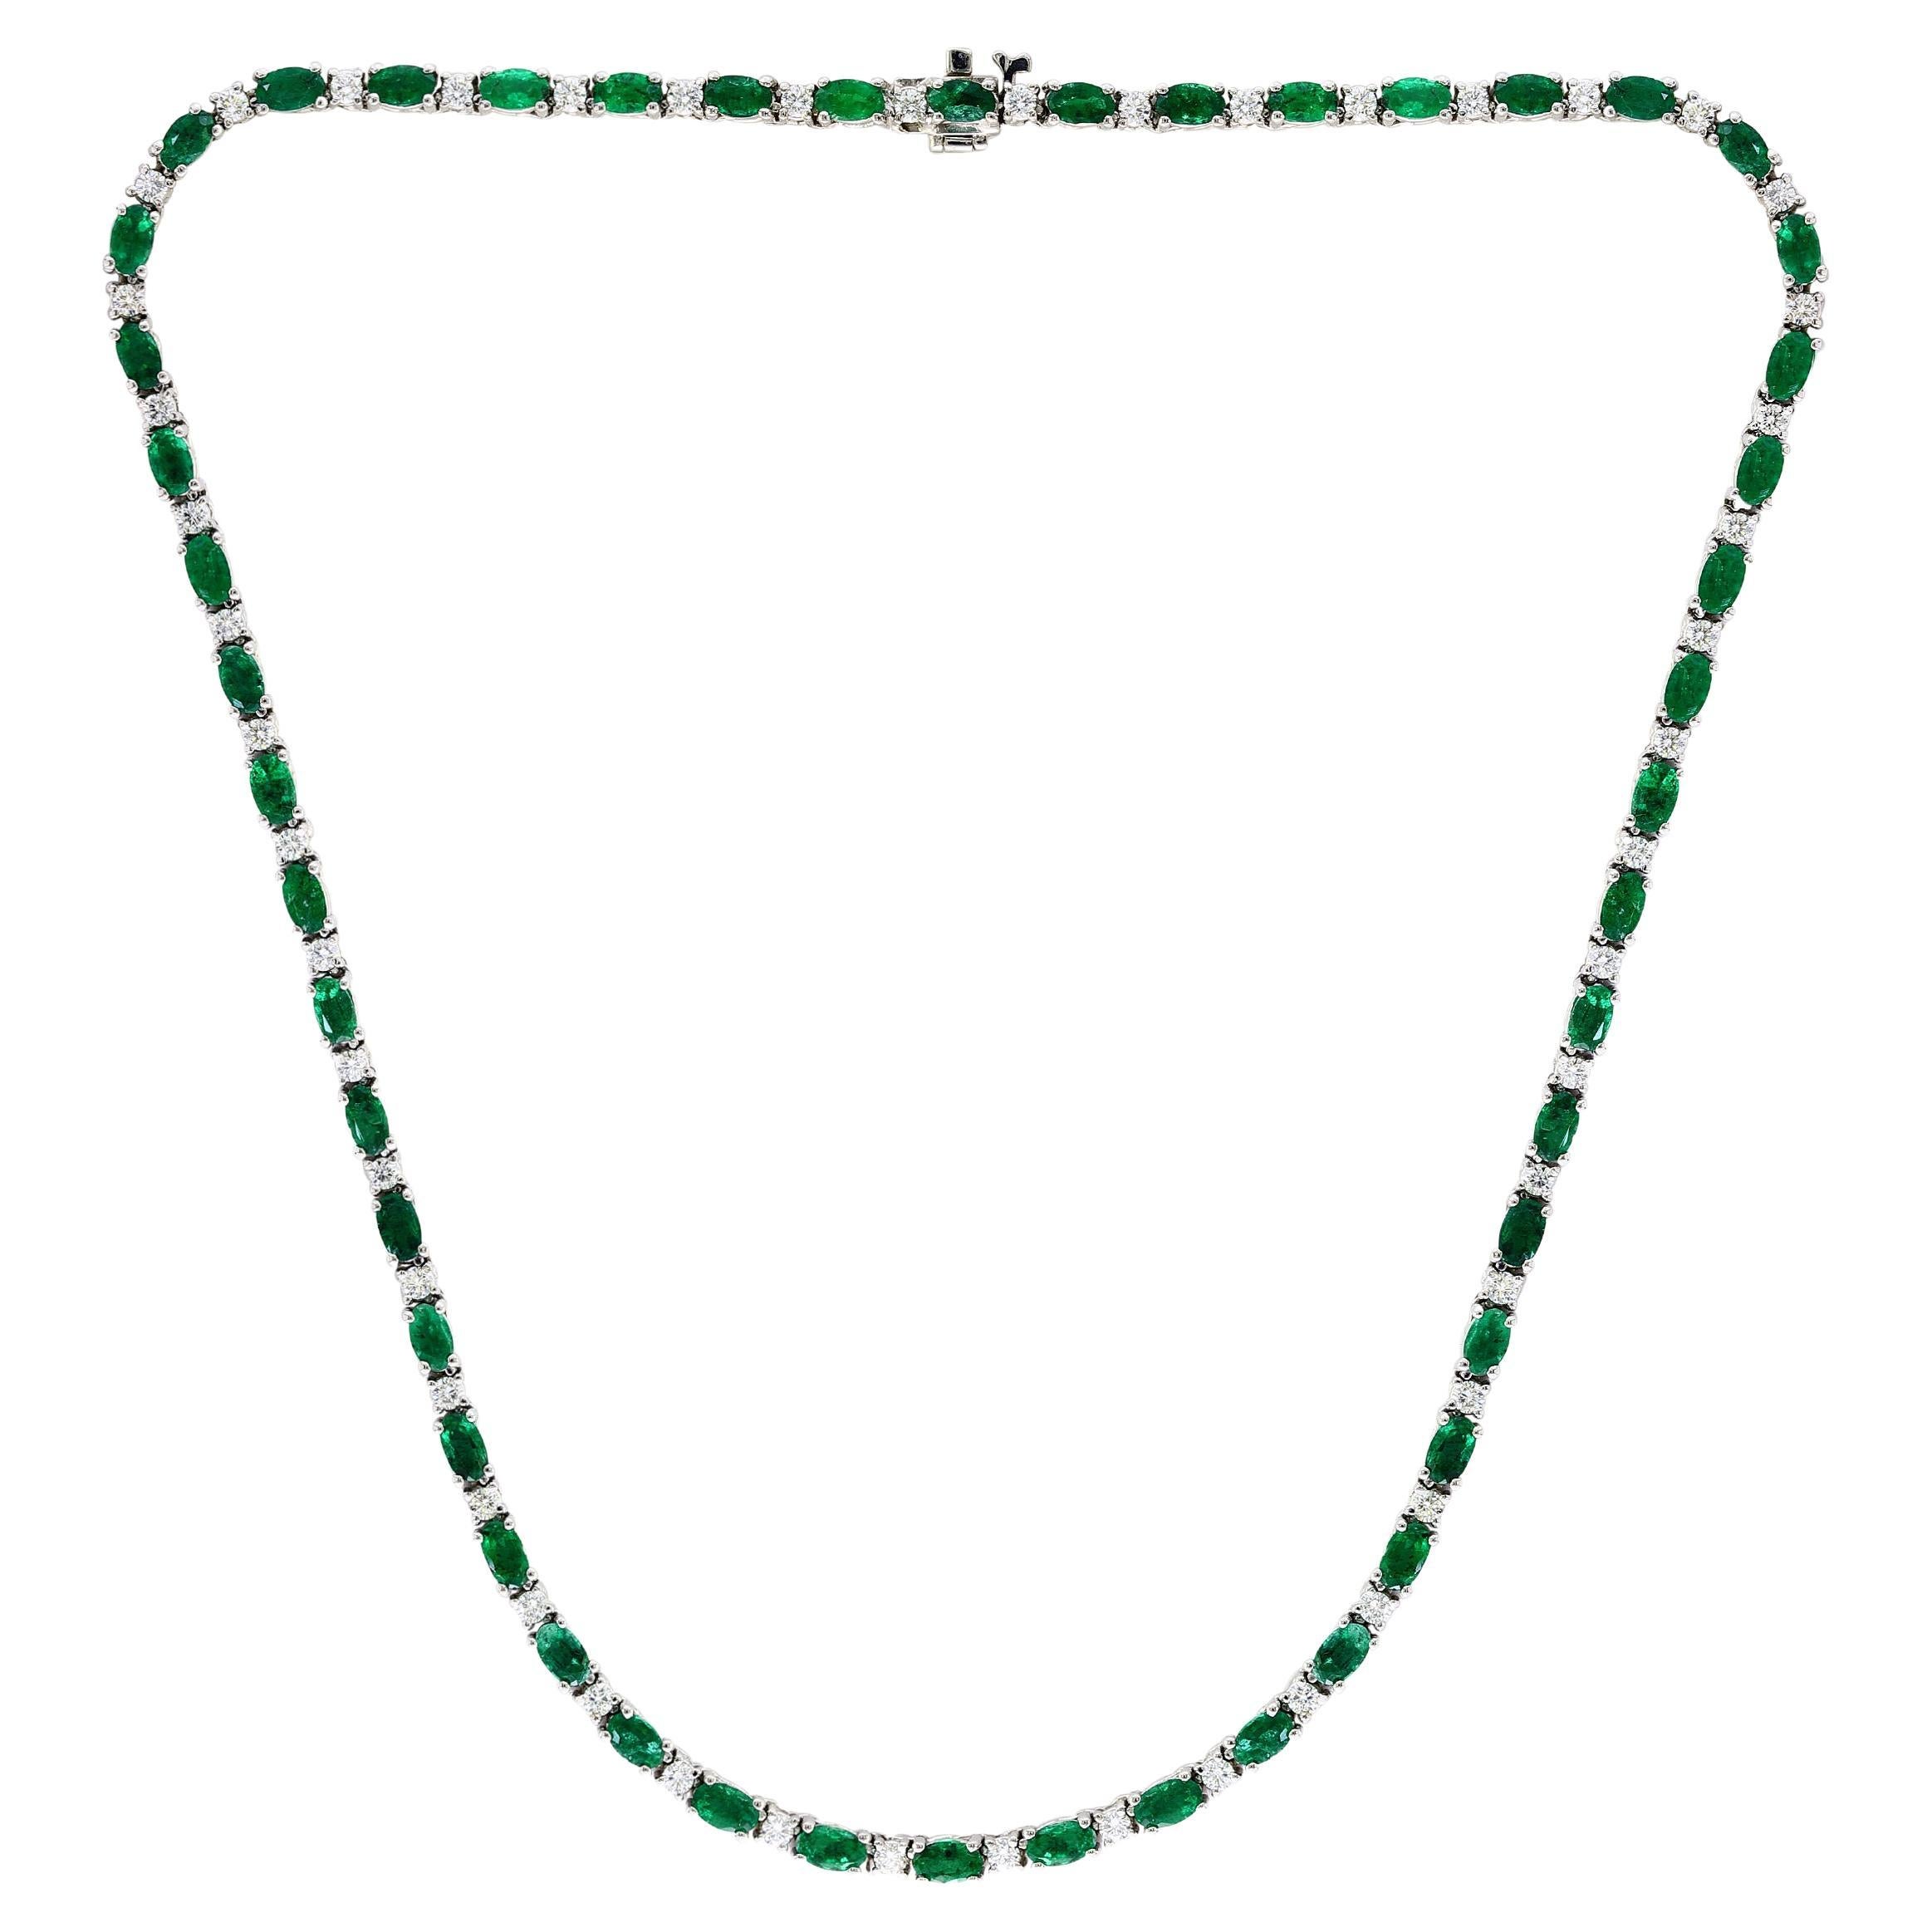 11.52 Carat Oval Cut Emerald and Diamond Tennis Necklace in 14K White Gold